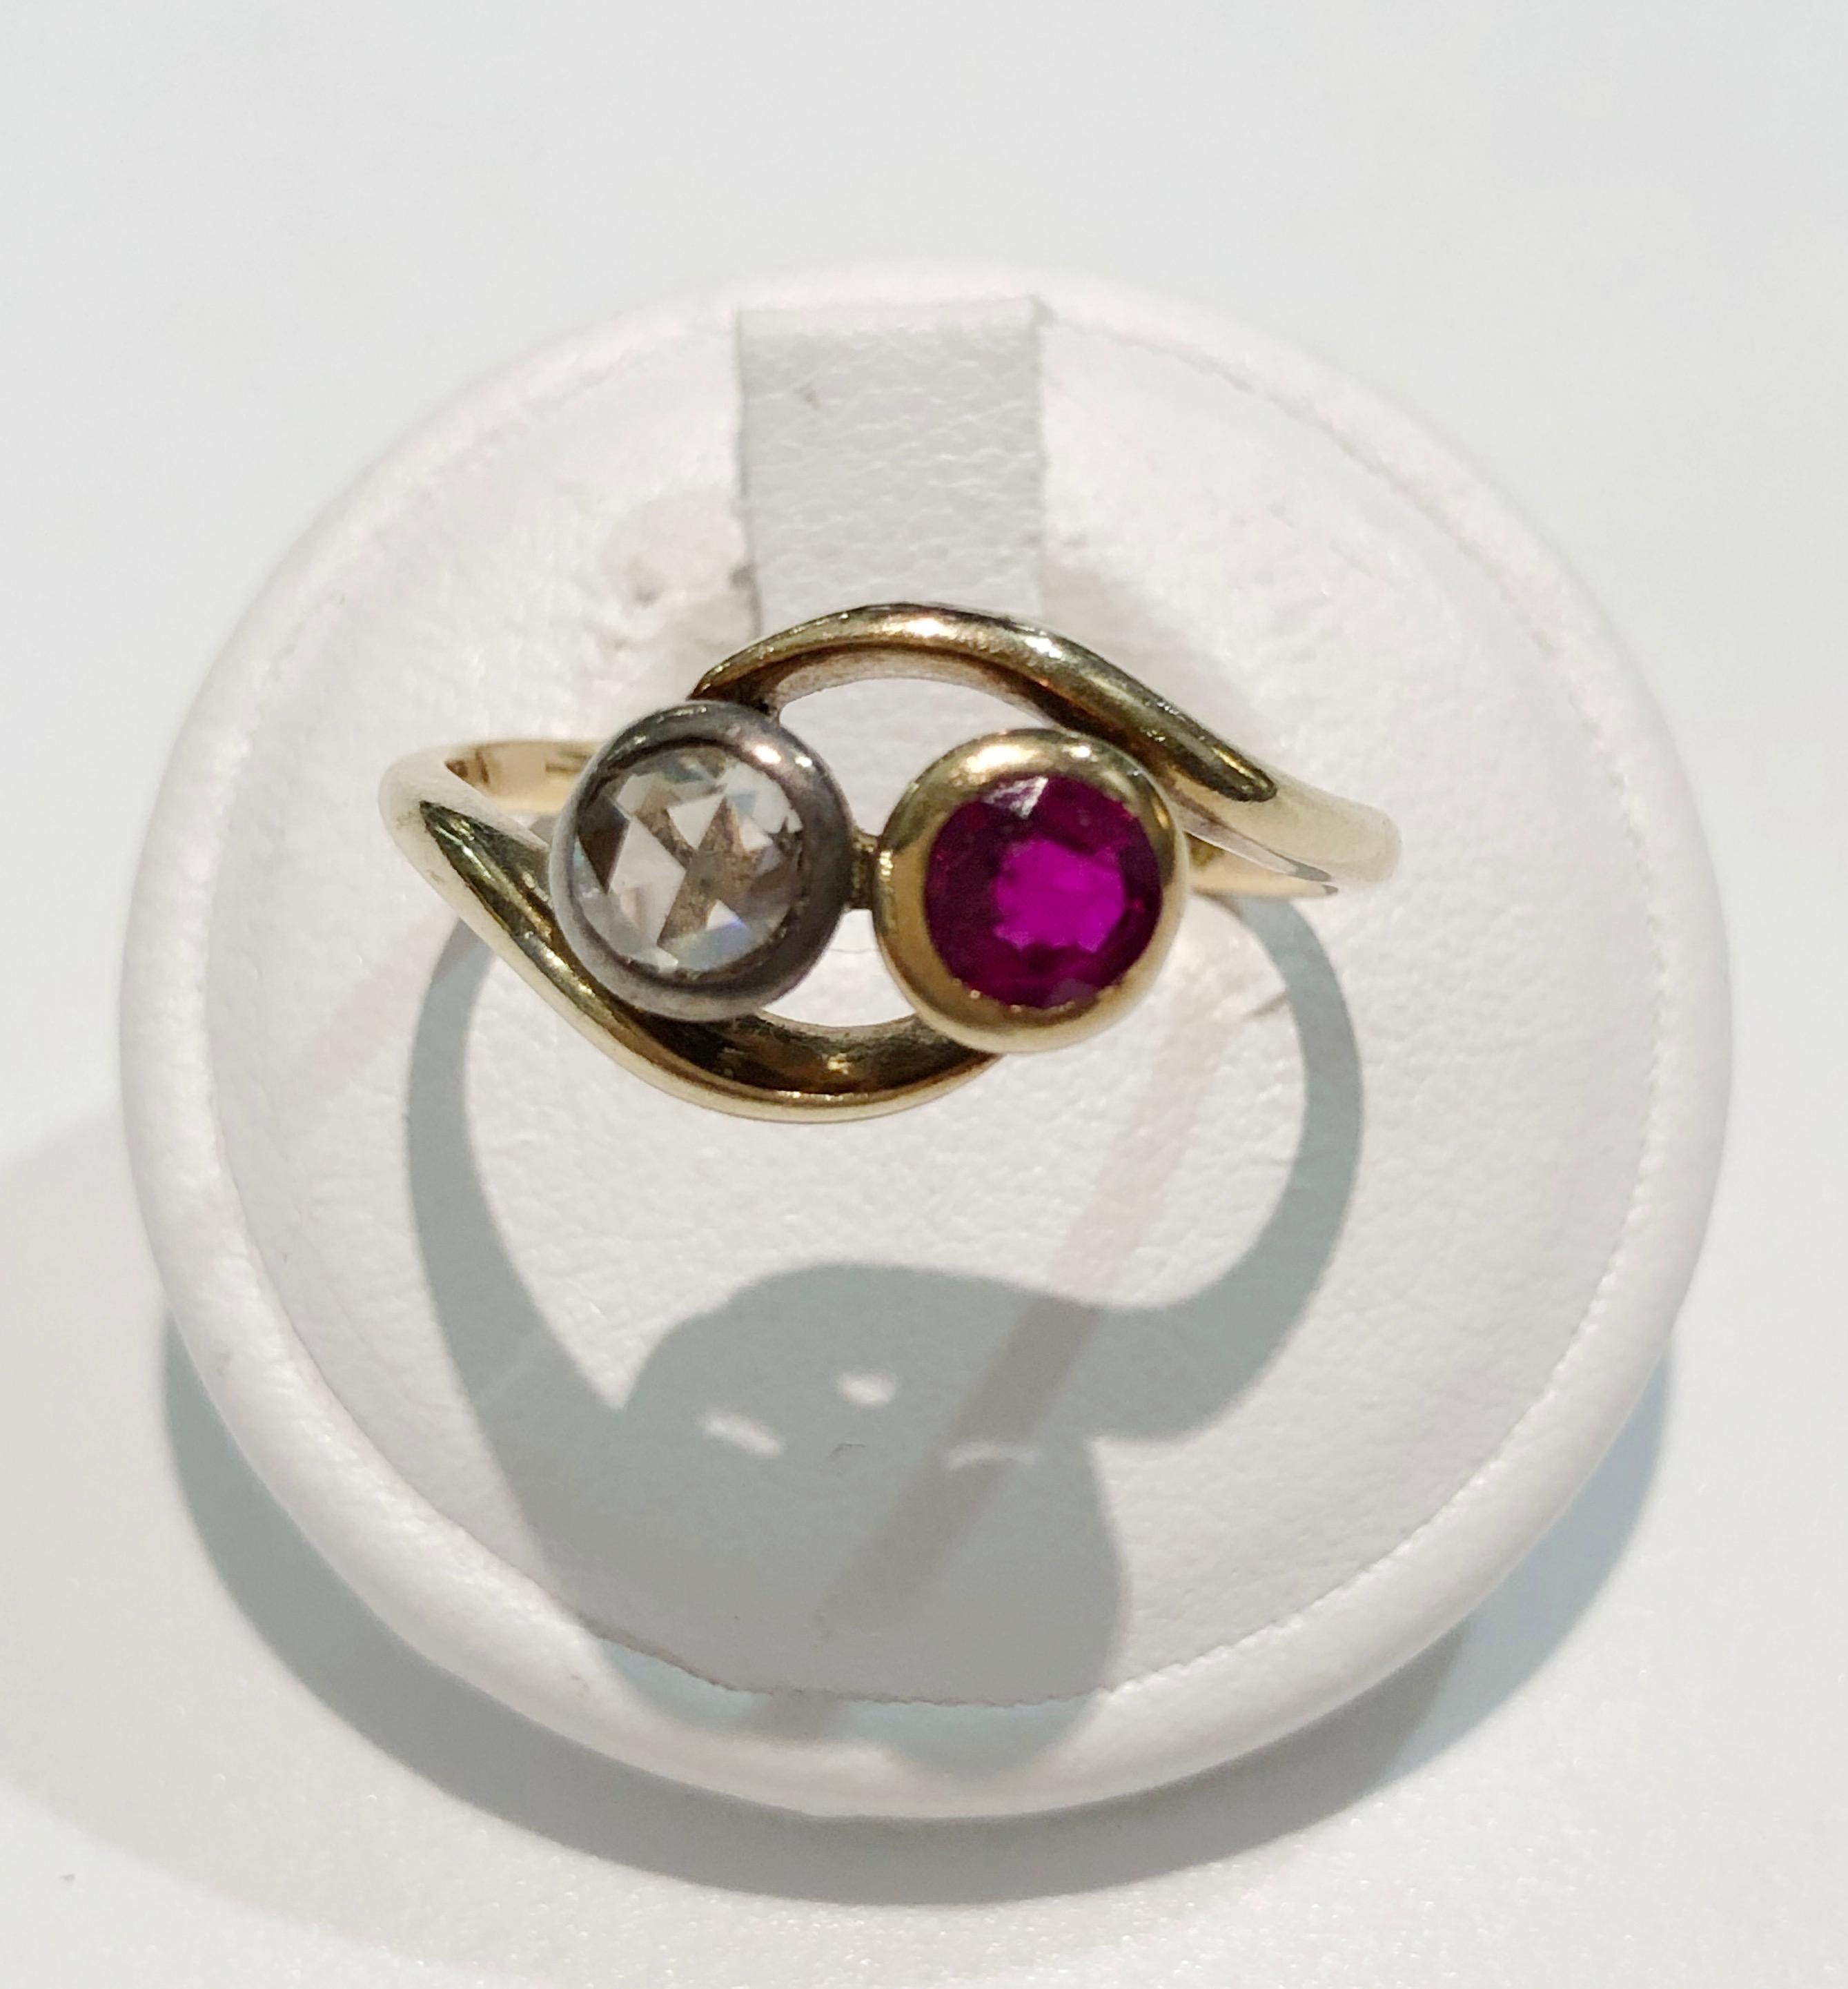 Vintage contrarier 18 karat gold ring with diamond and ruby, Italy 1870s-1890s
Ring size US 8